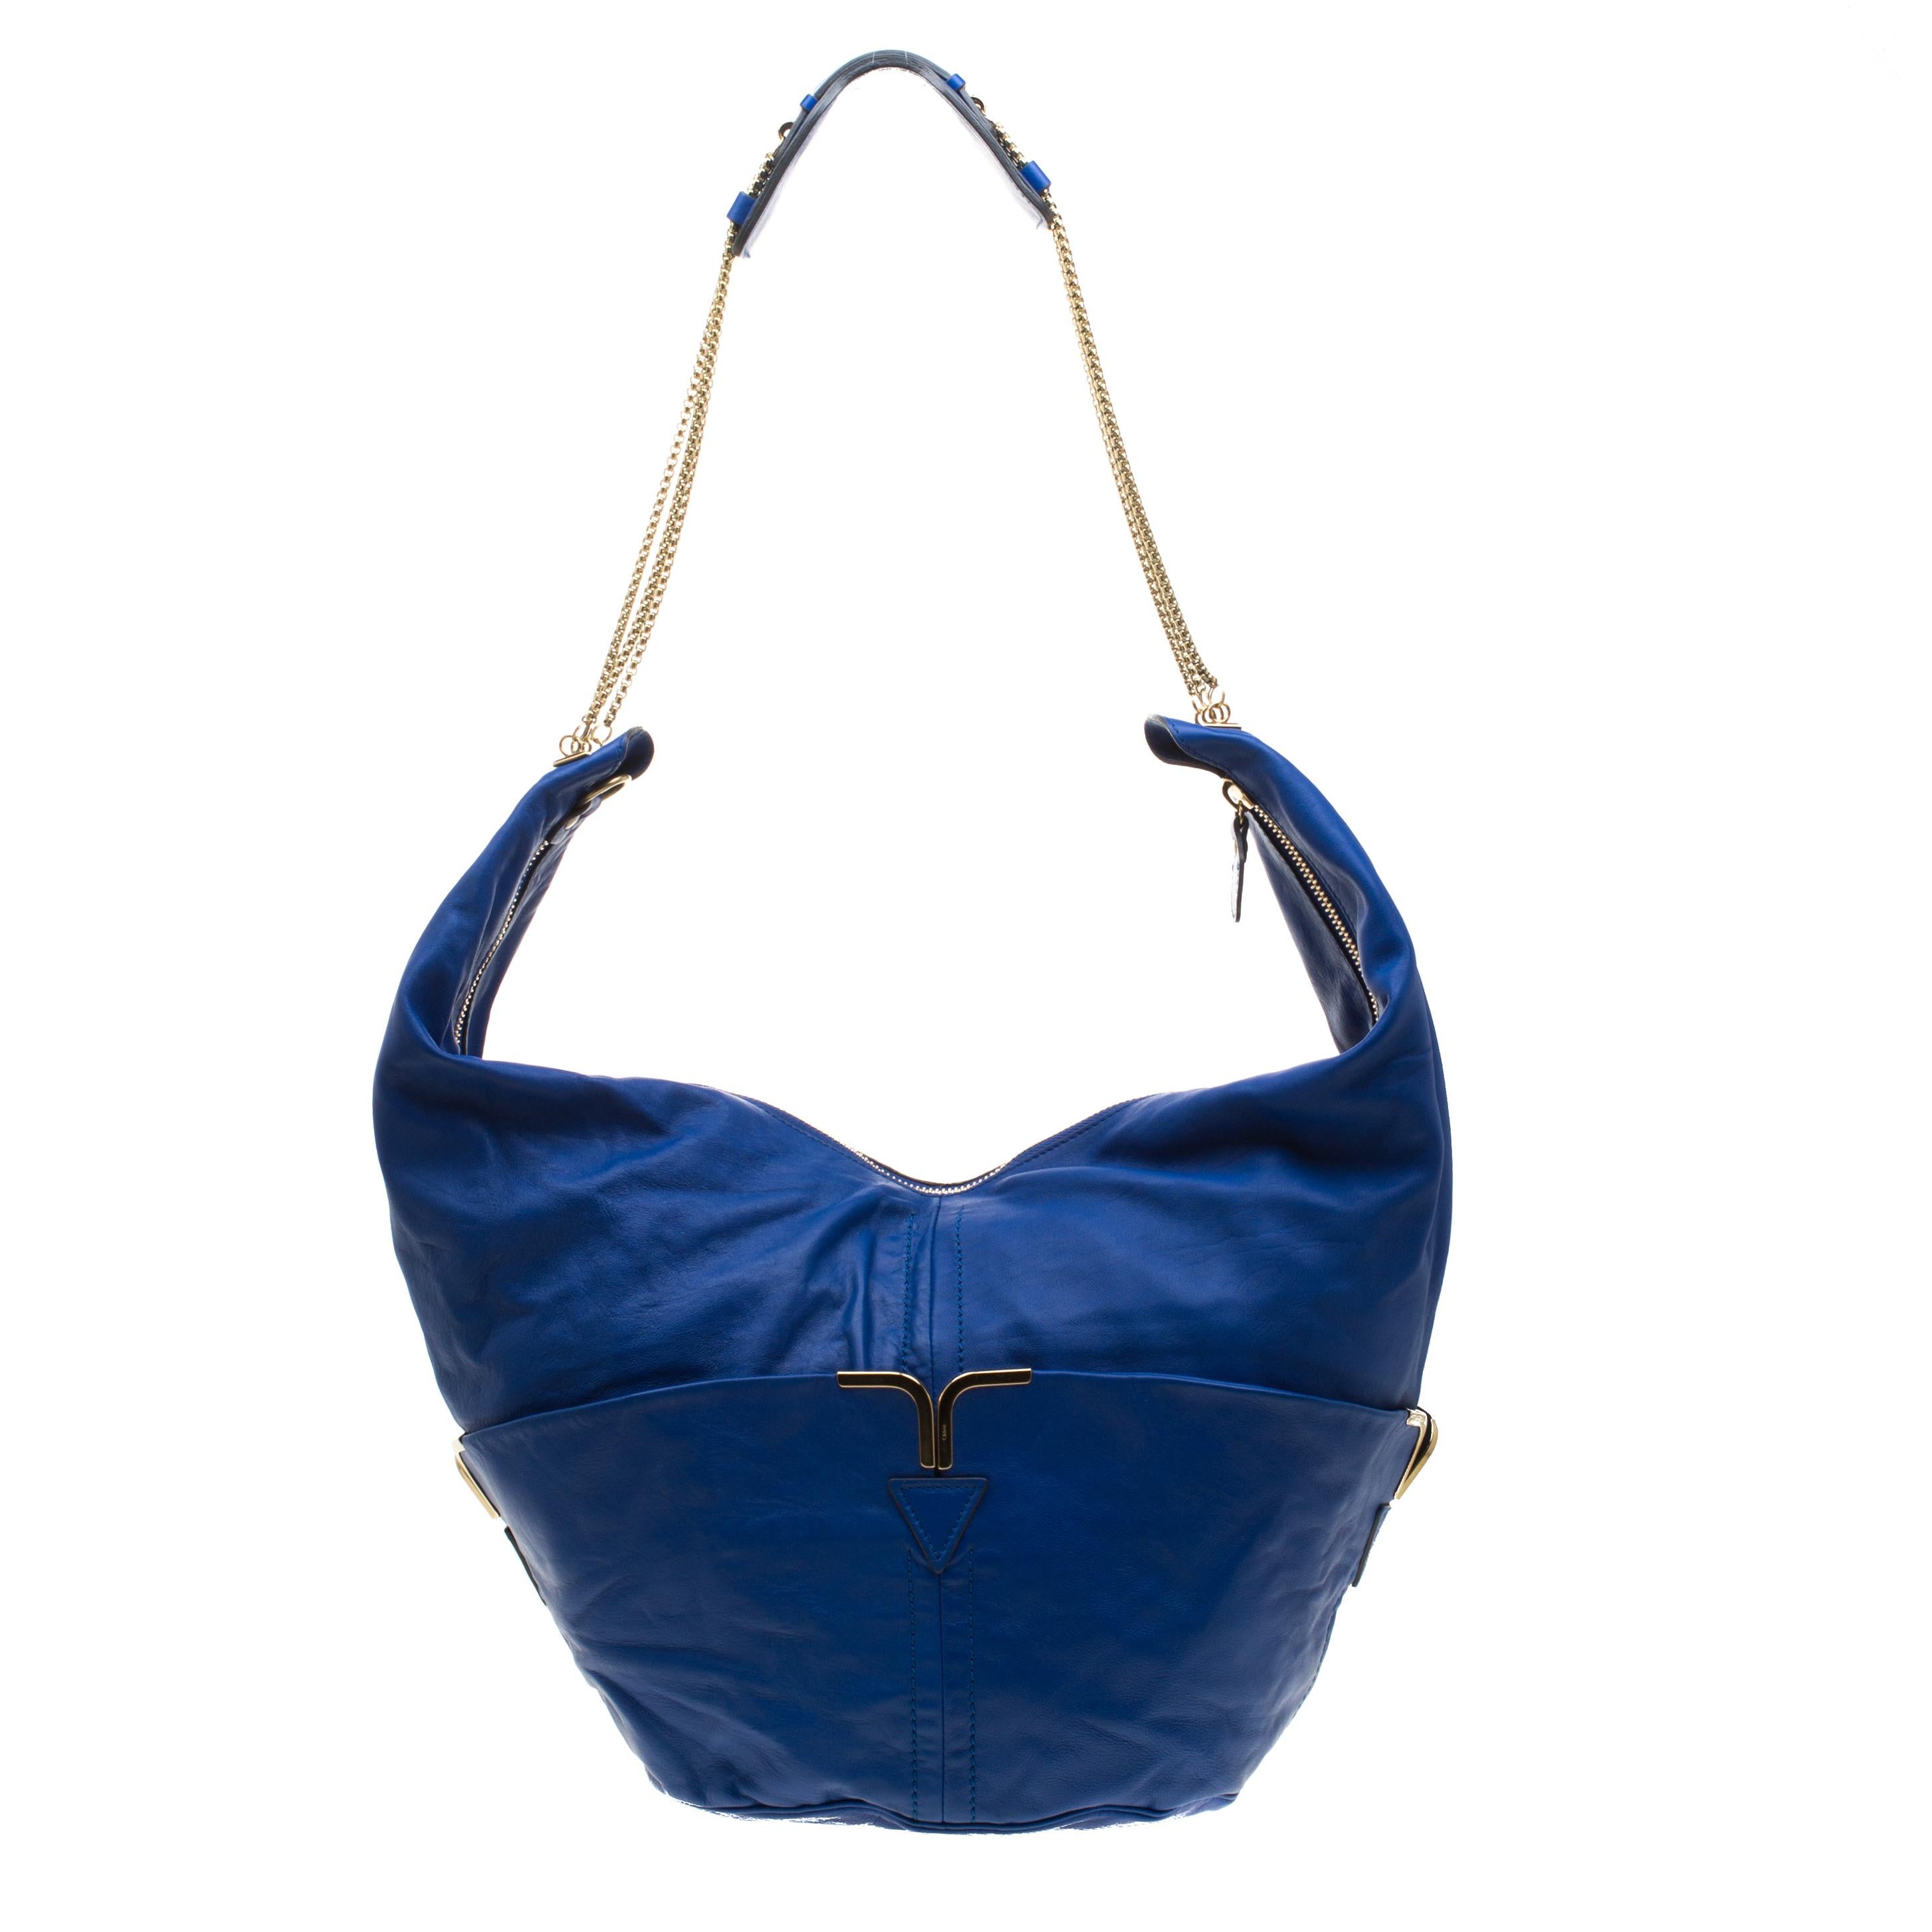 Update your bag collection with this Chloe Milton hobo. Crafted from a durable leather body in a gorgeous blue hue, this bag features a top zipper closure and comes equipped with two large pockets on the front and rear. Accented with gold-tone